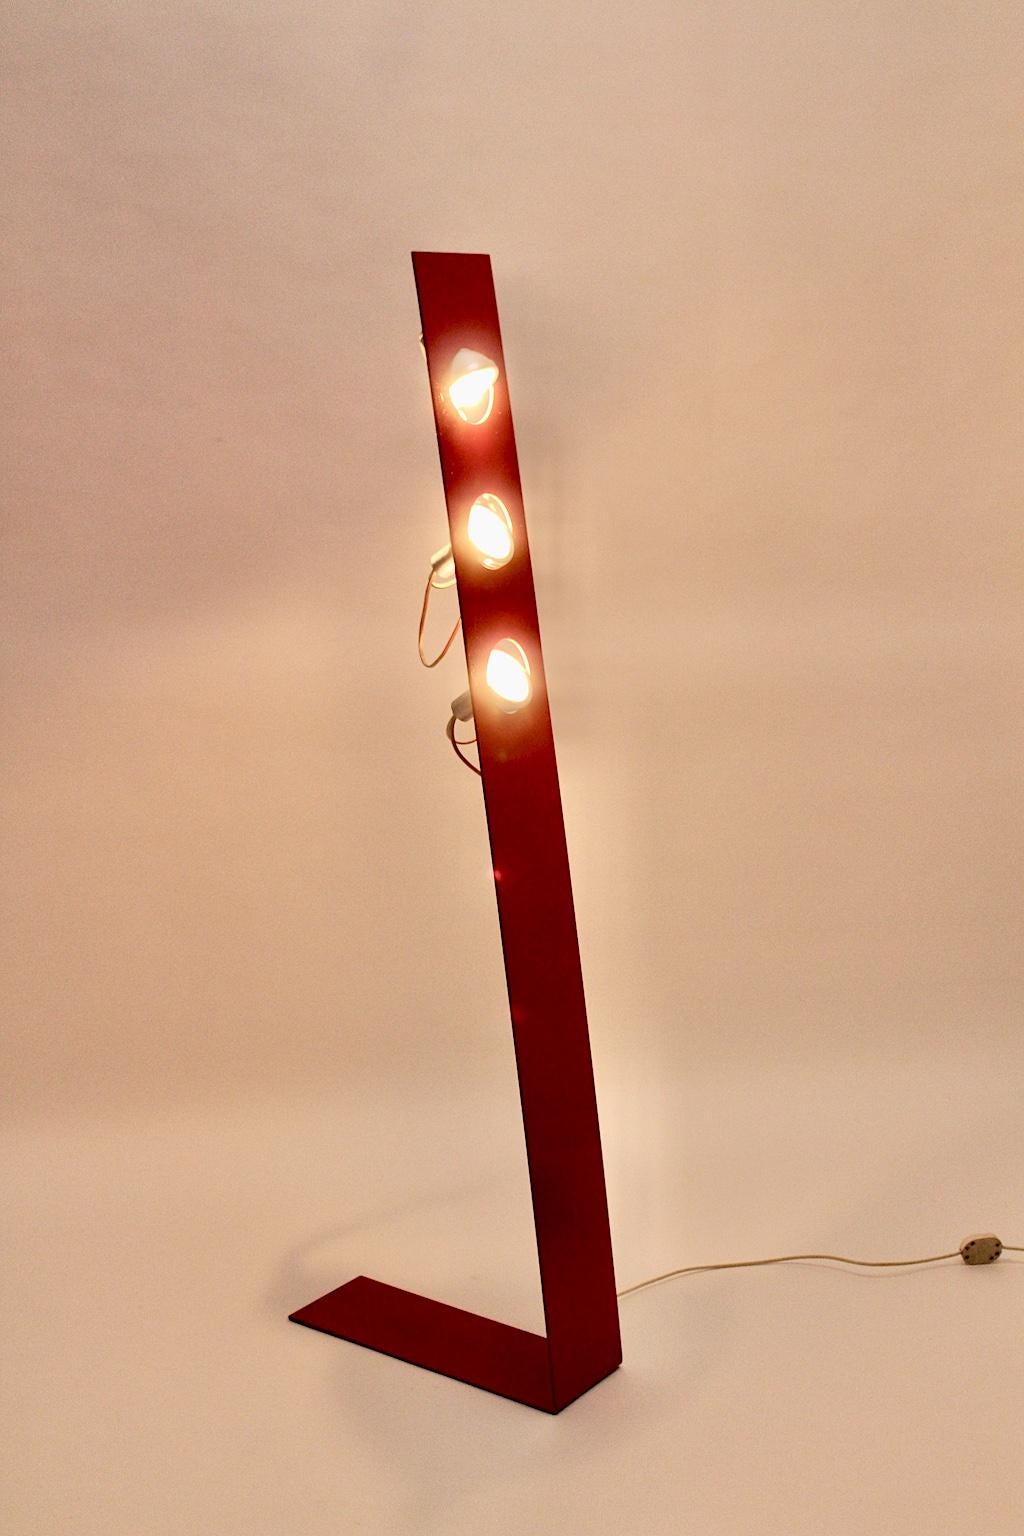 Space age vintage red metal floor lamp designed and manufactured 1960s, Italy.
The amazing floor lamp features a red kinked metal base with three E 14 sockets.
The lights are adjustable.
Also the floor lamp shows an on/off foot switch. 
The